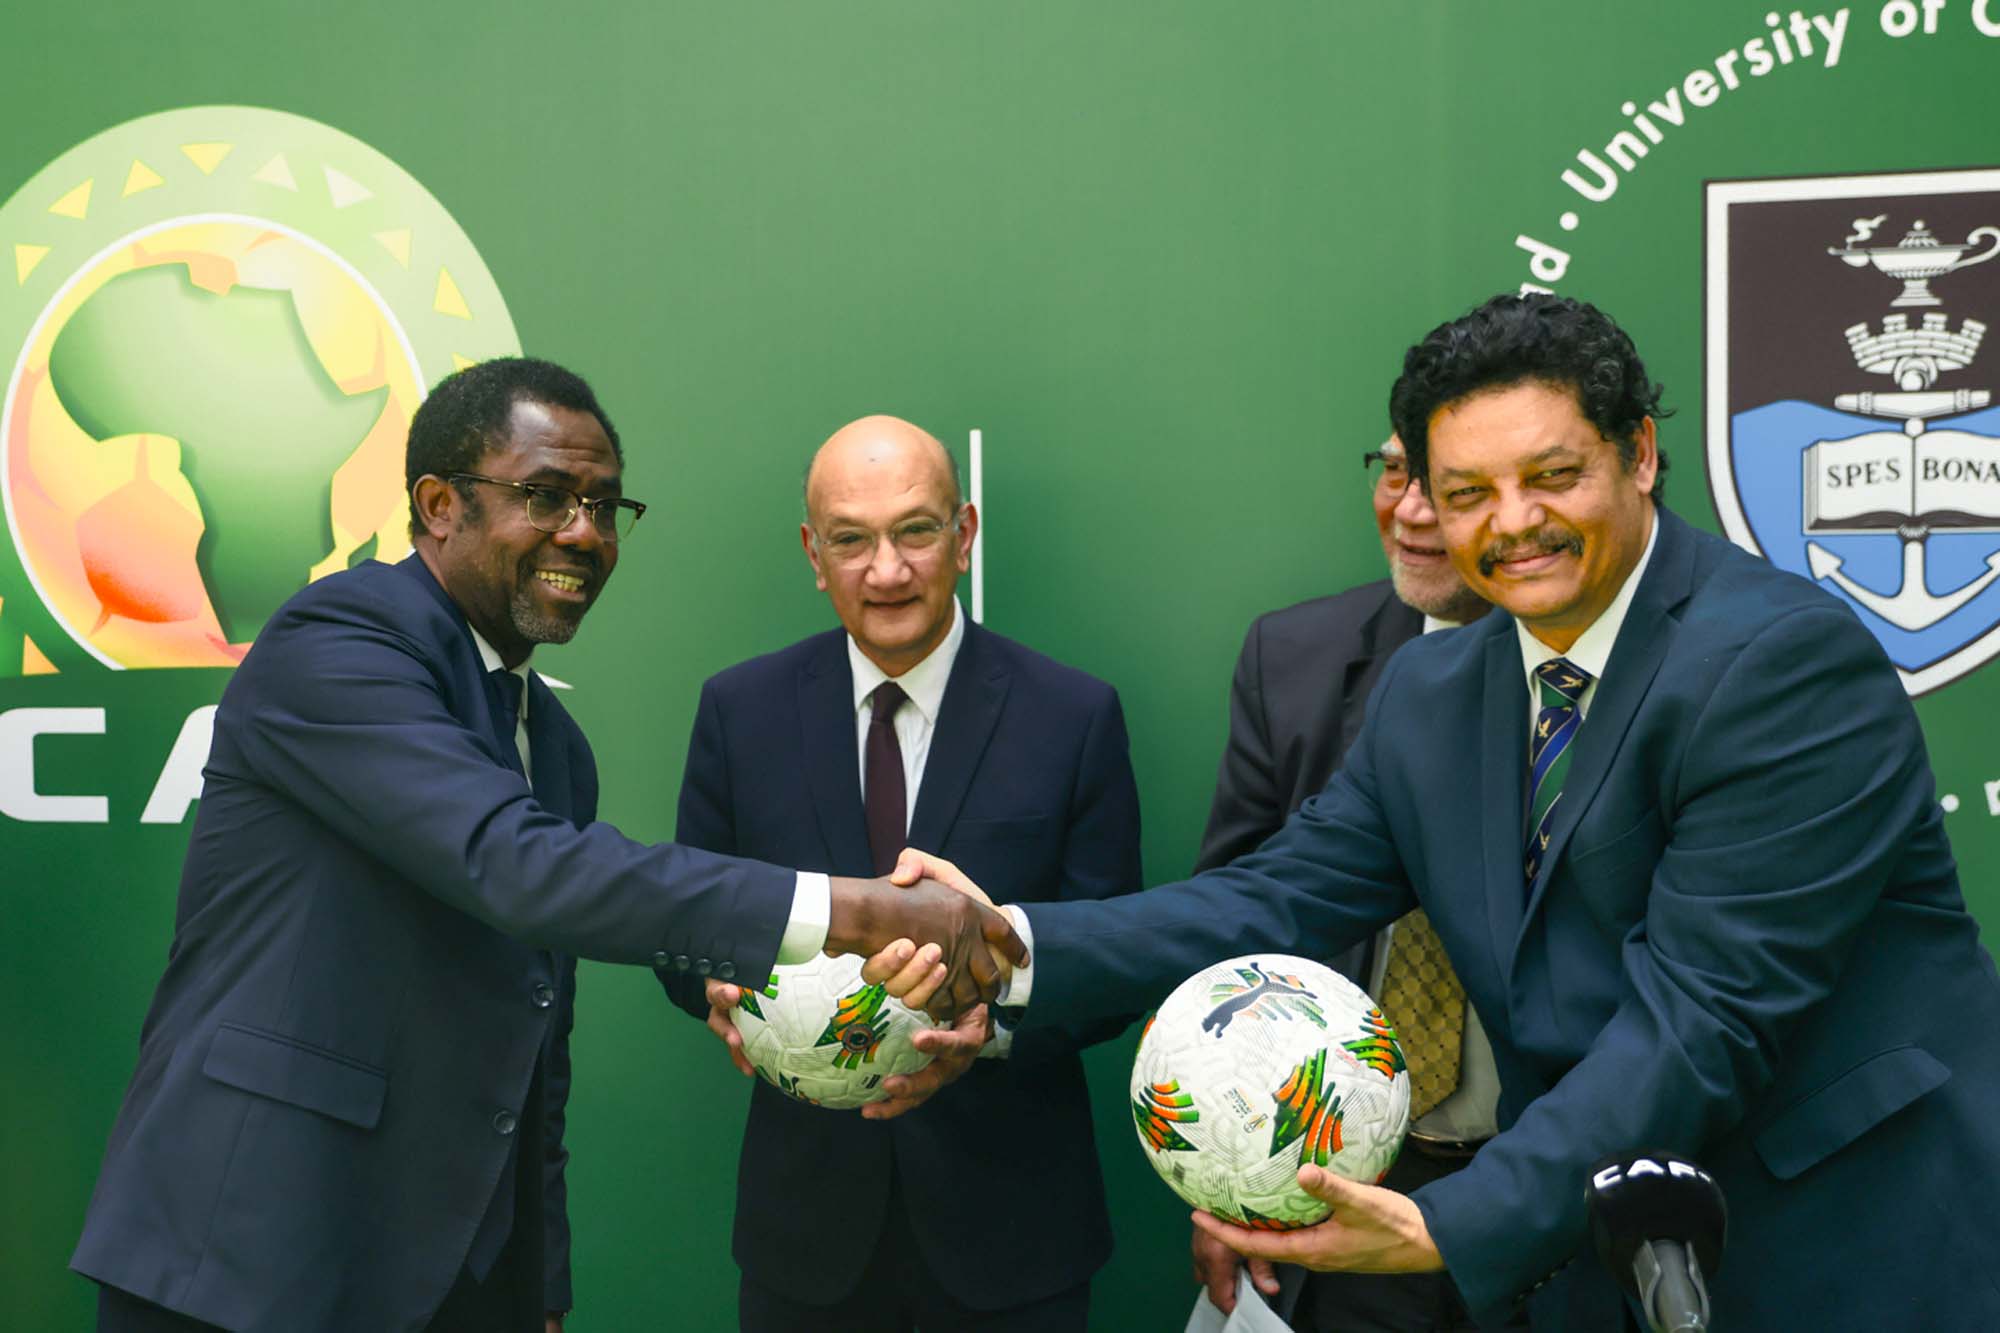 UCT Internationalisation Director, Quinton Johnson PhD, receiving the CAF football from the CAF Secretary General.